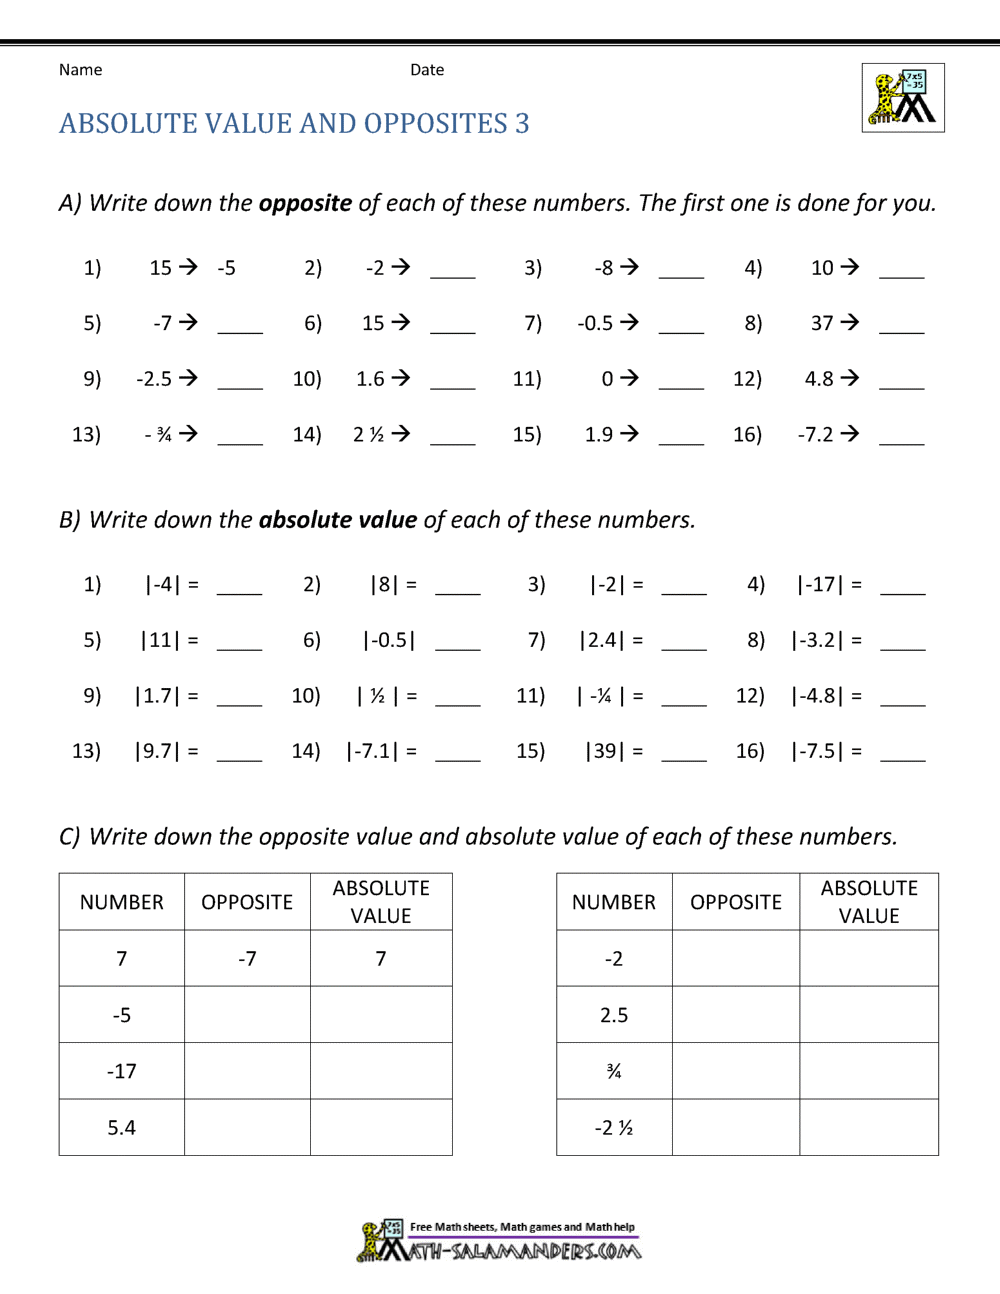 Absolute Value Worksheets For Absolute Value Worksheet Pdf